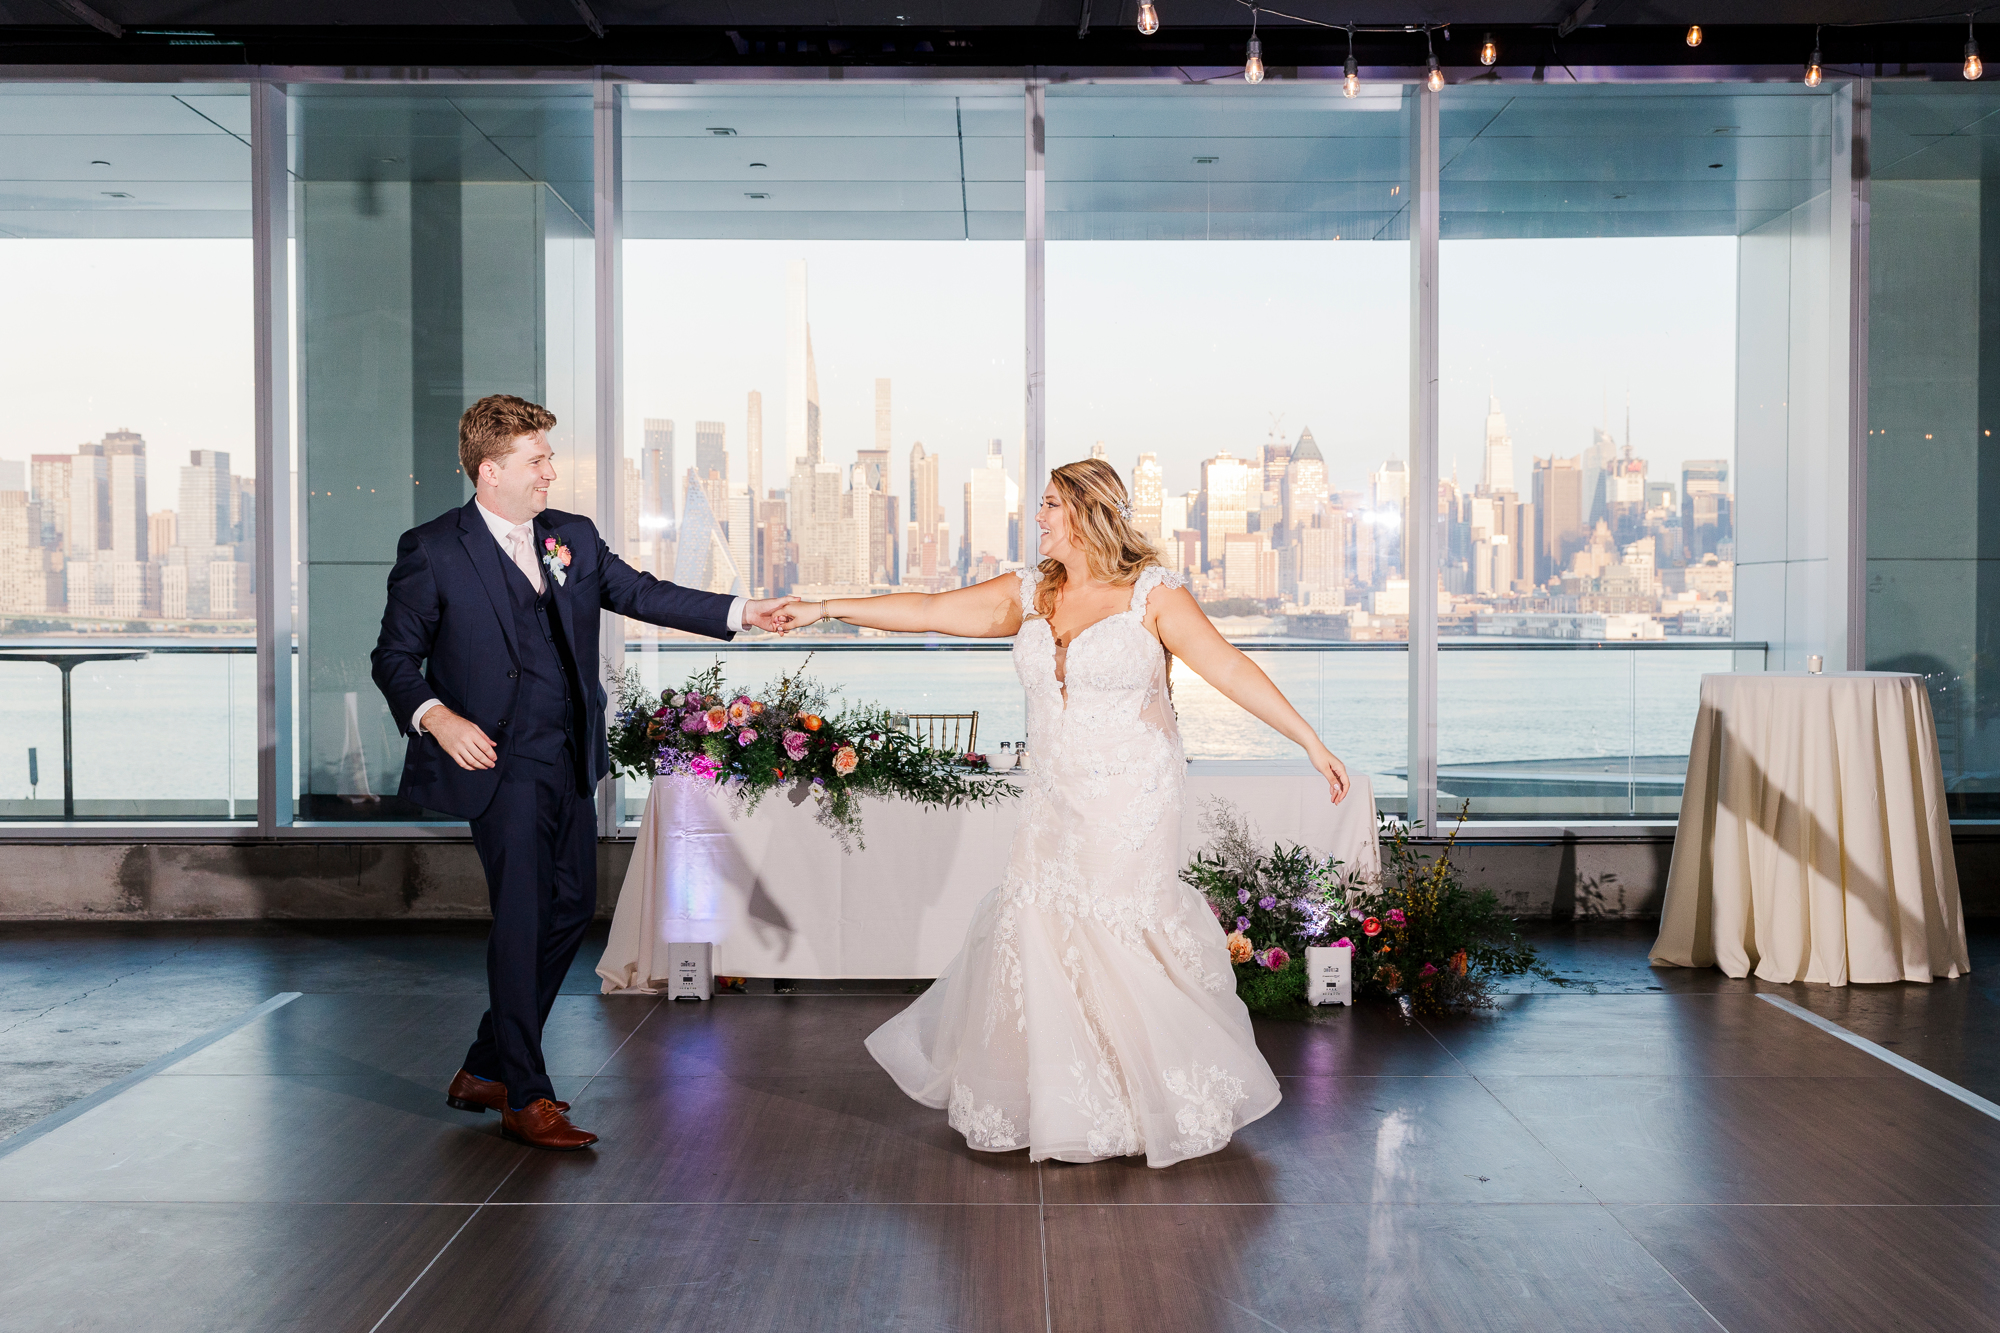 Whimsical Envue Hotel wedding in New Jersey